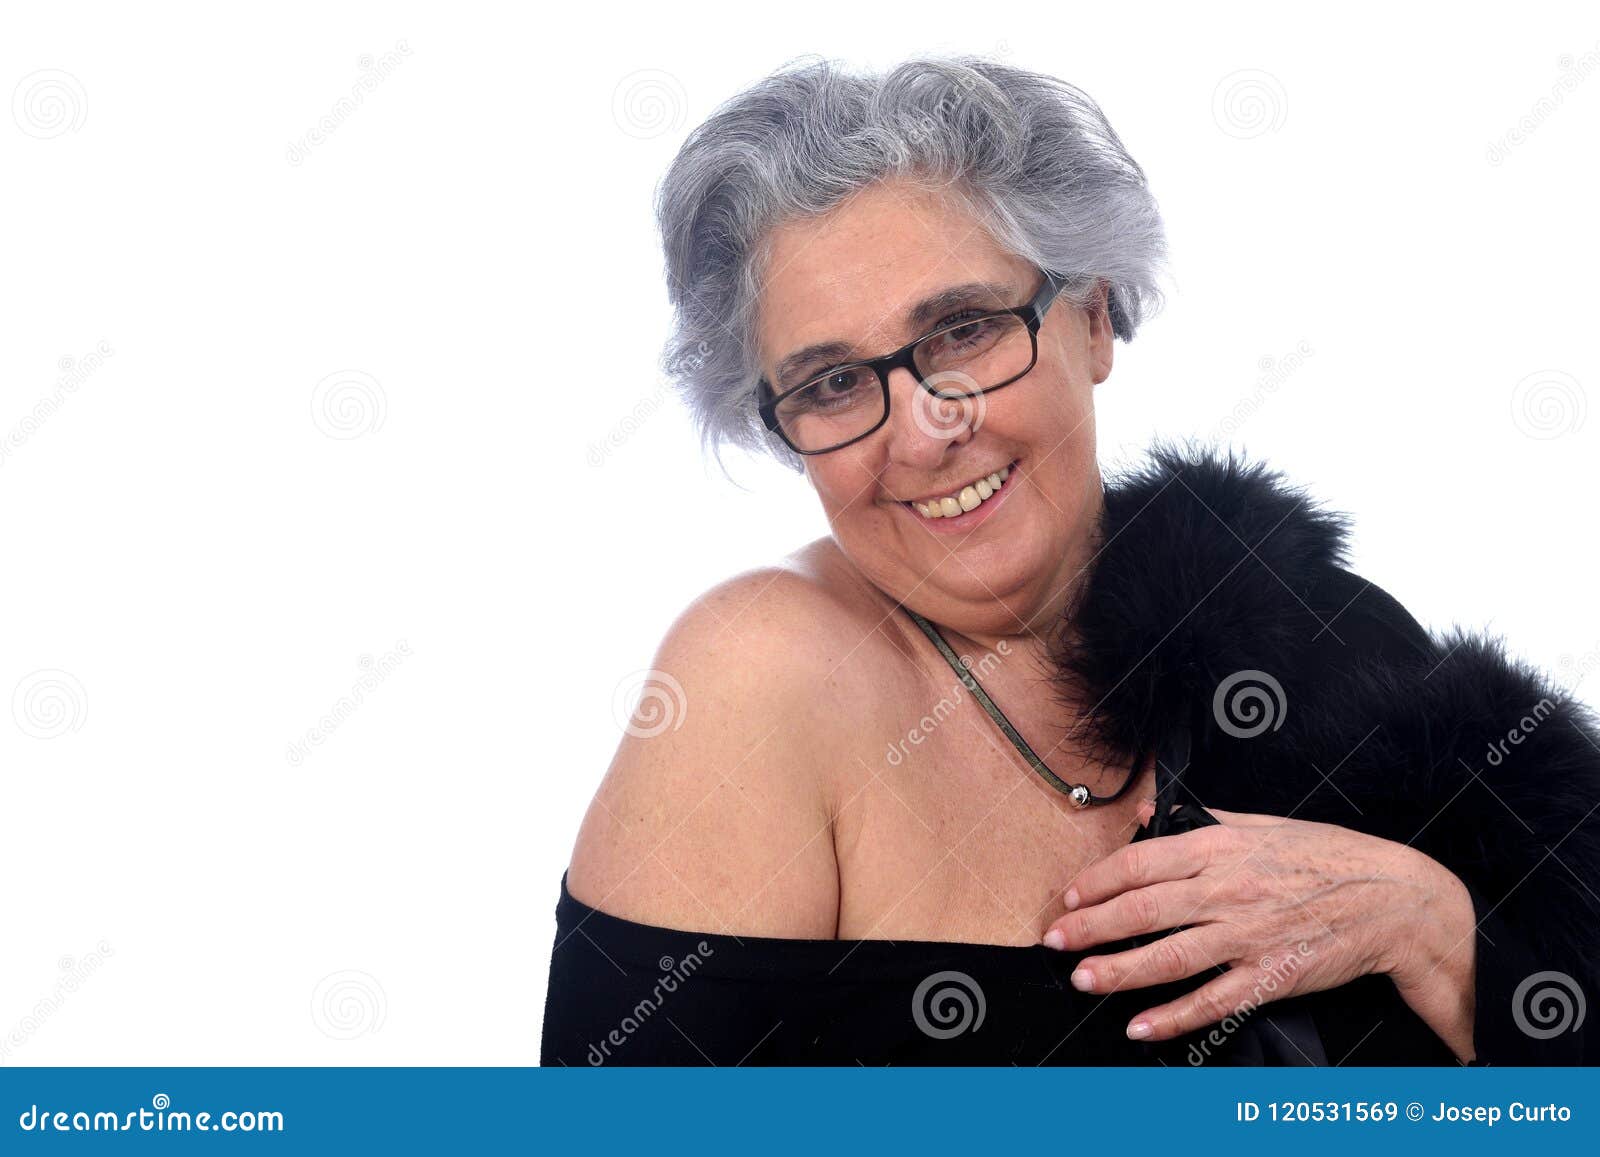 angela cranford recommends sexy old white women pic